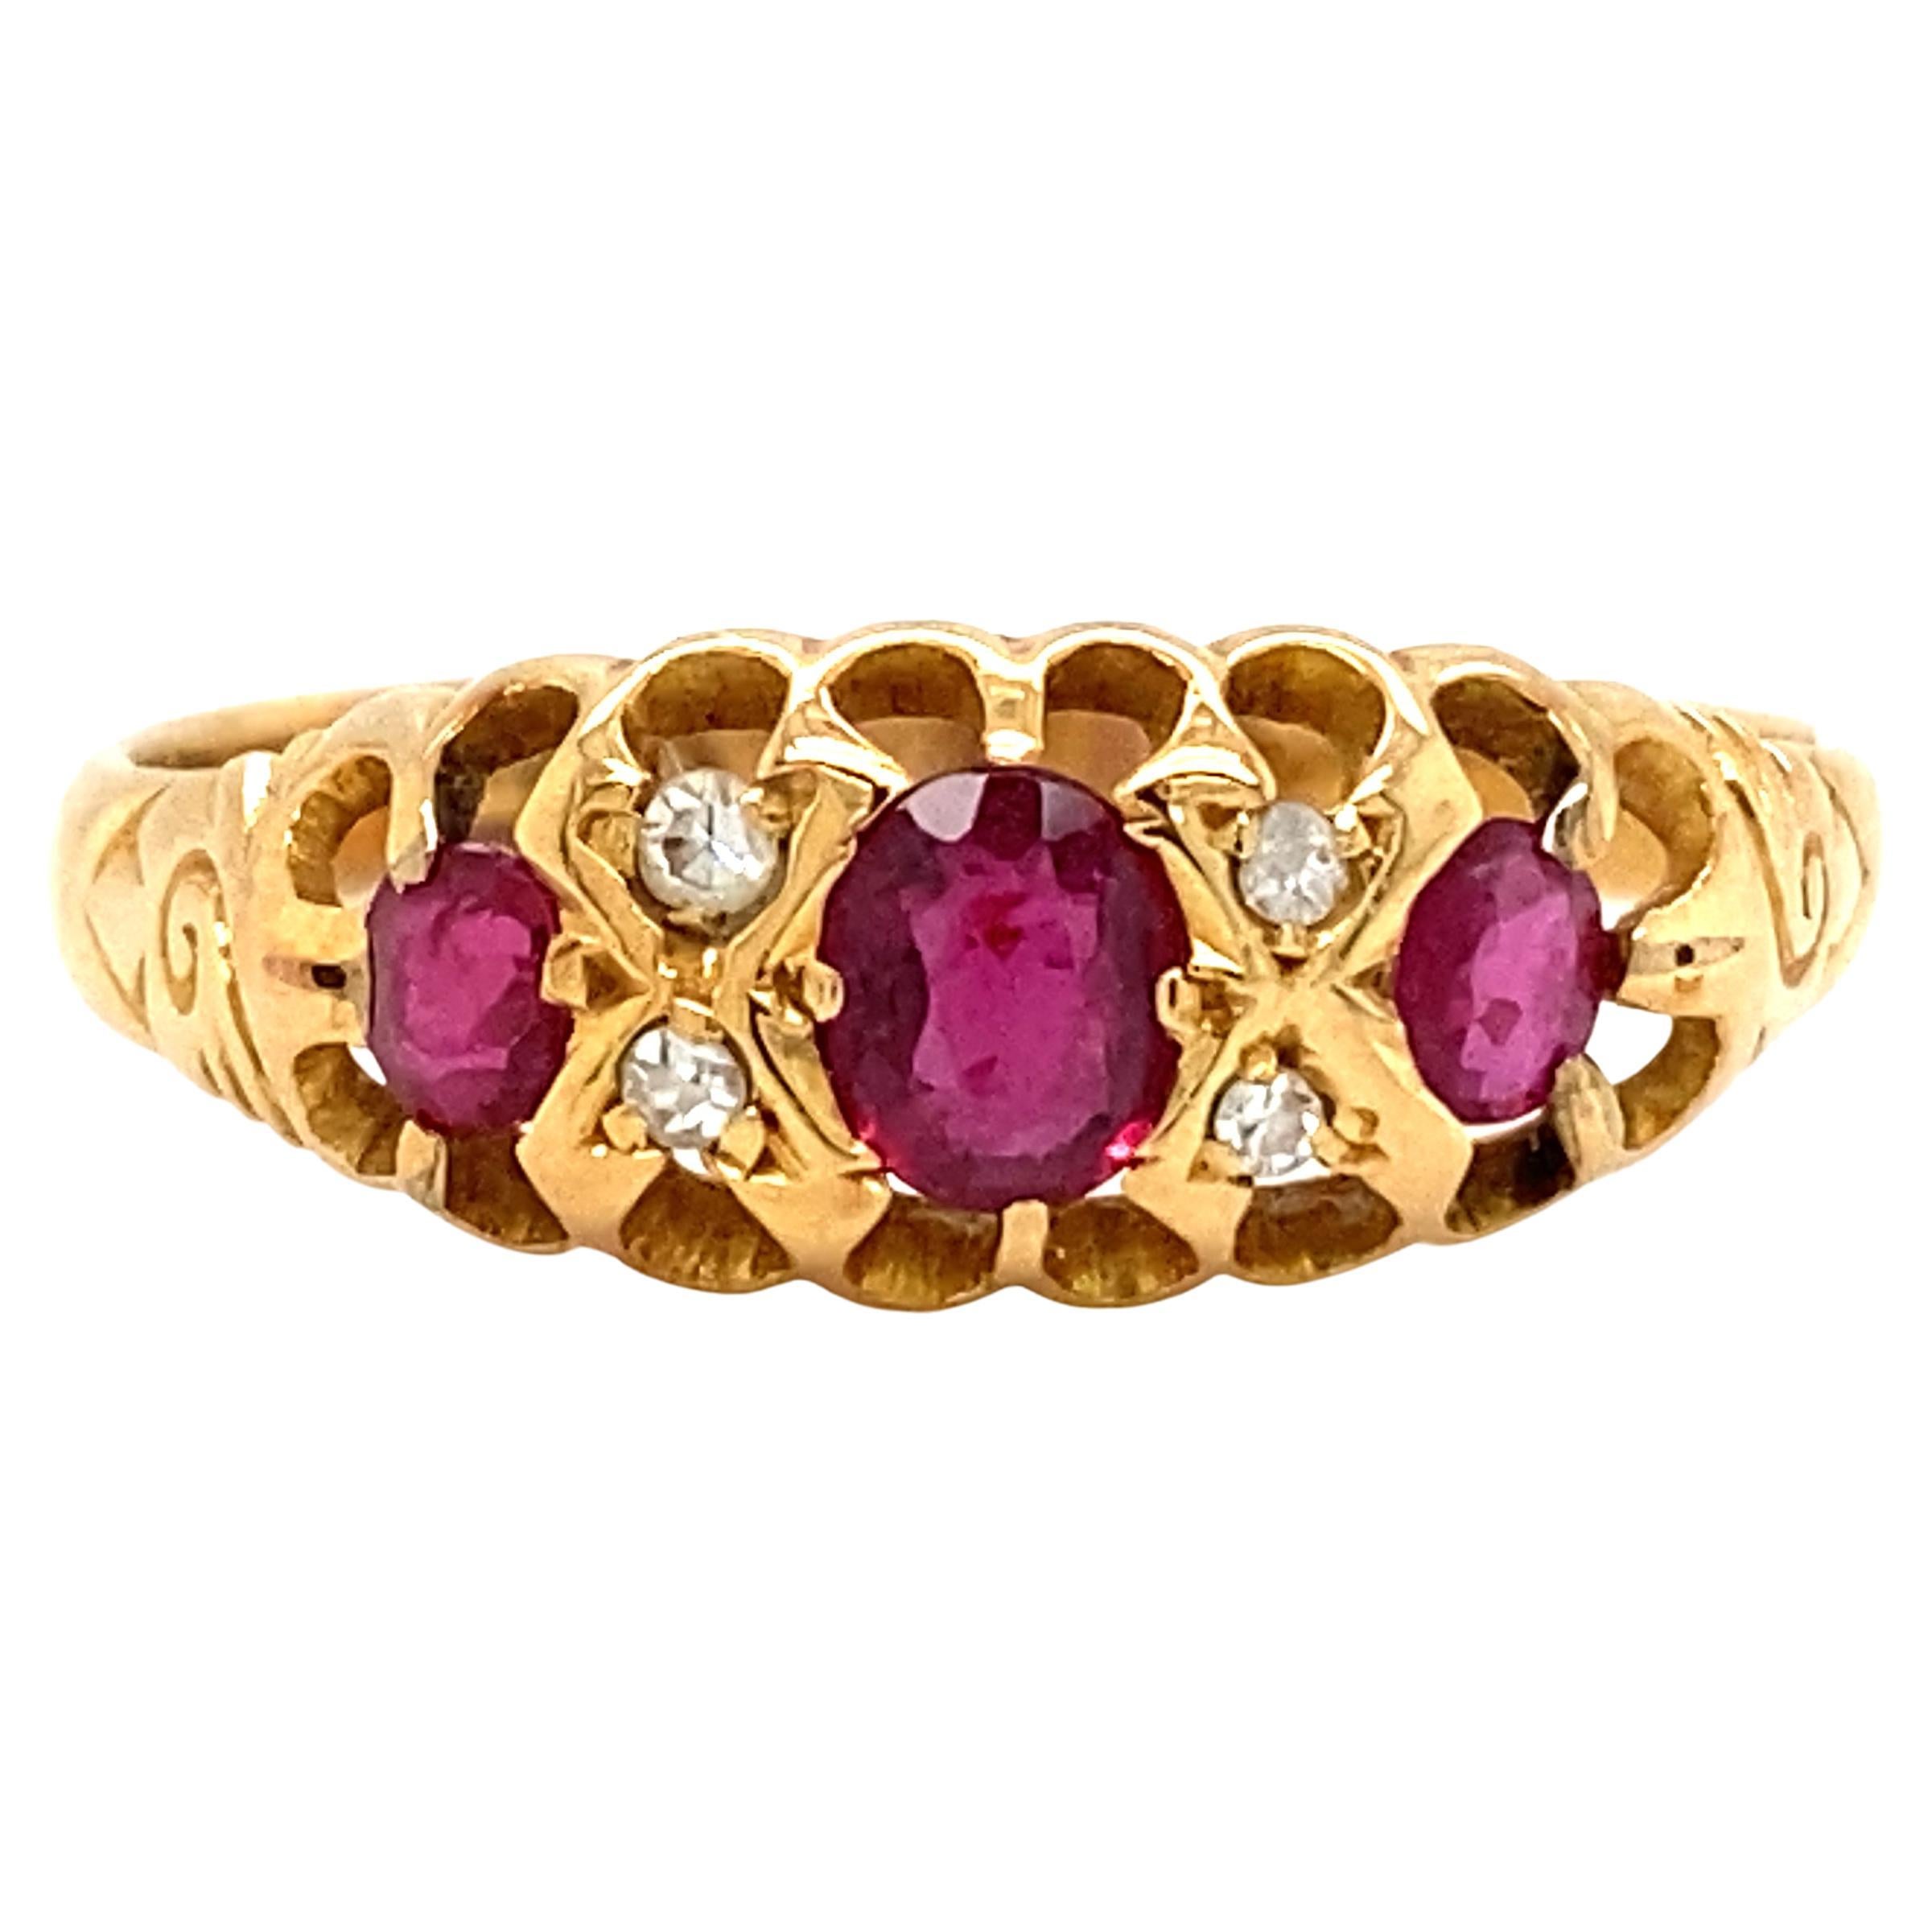 Circa 1910s Edwardian Oval Ruby and Diamond Ring in 14 Karat Yellow Gold